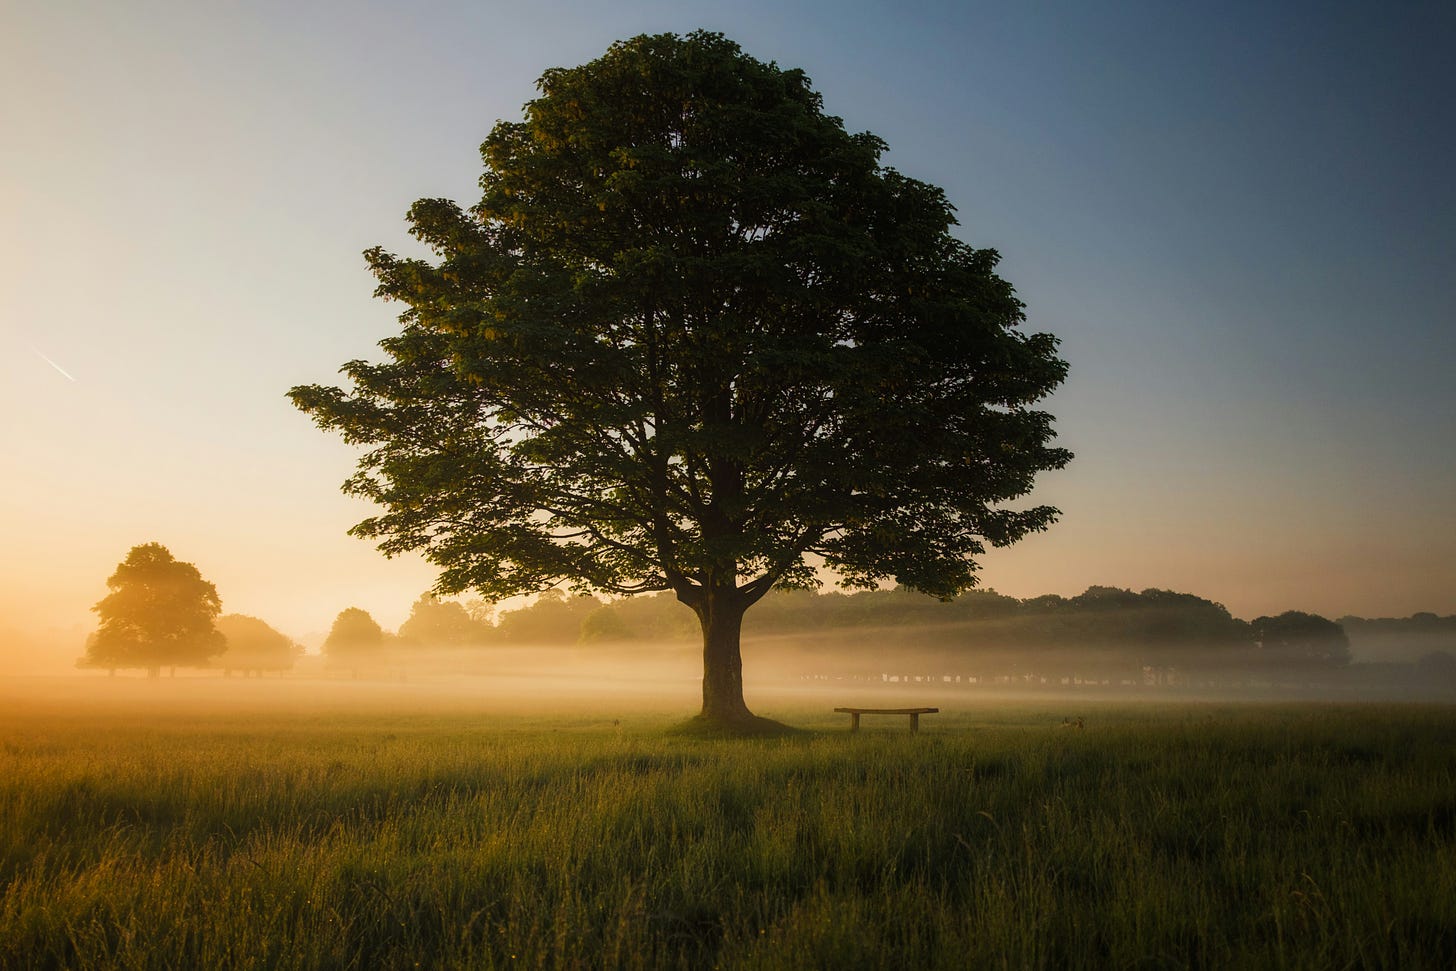 Full-sized deciduous tree in a foggy field with a bench underneath